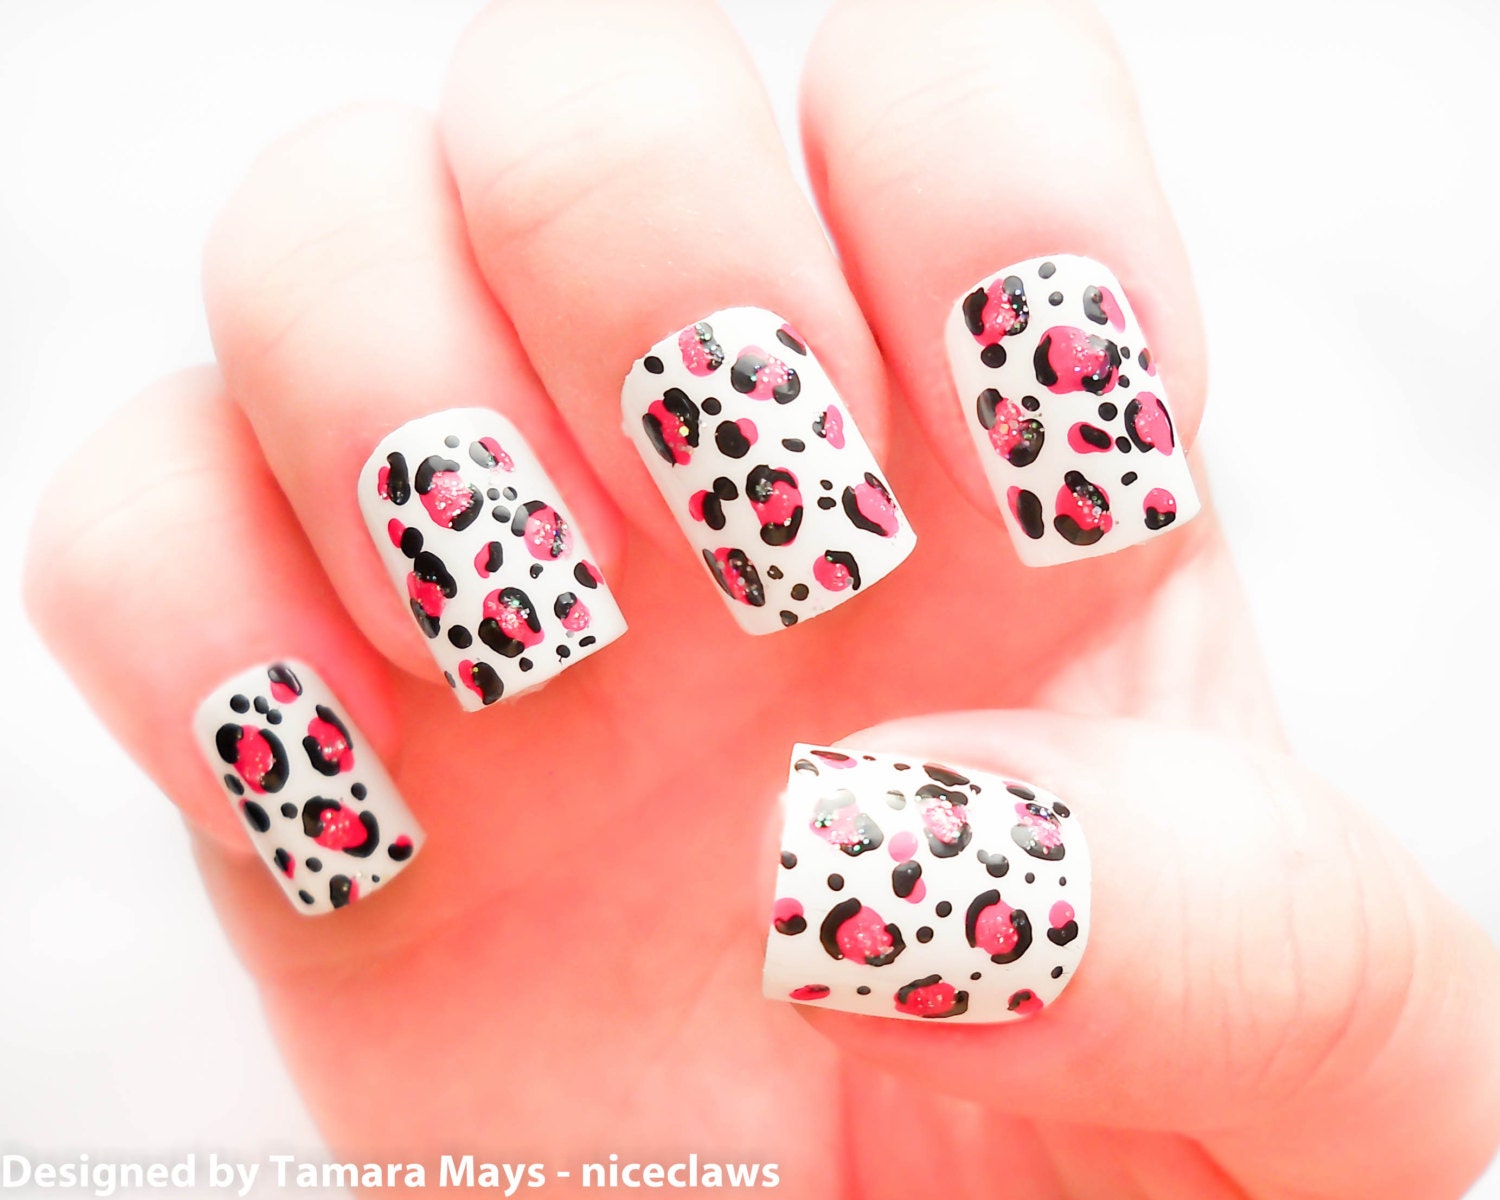 1. Brown and Black Leopard Print Nail Art - wide 4